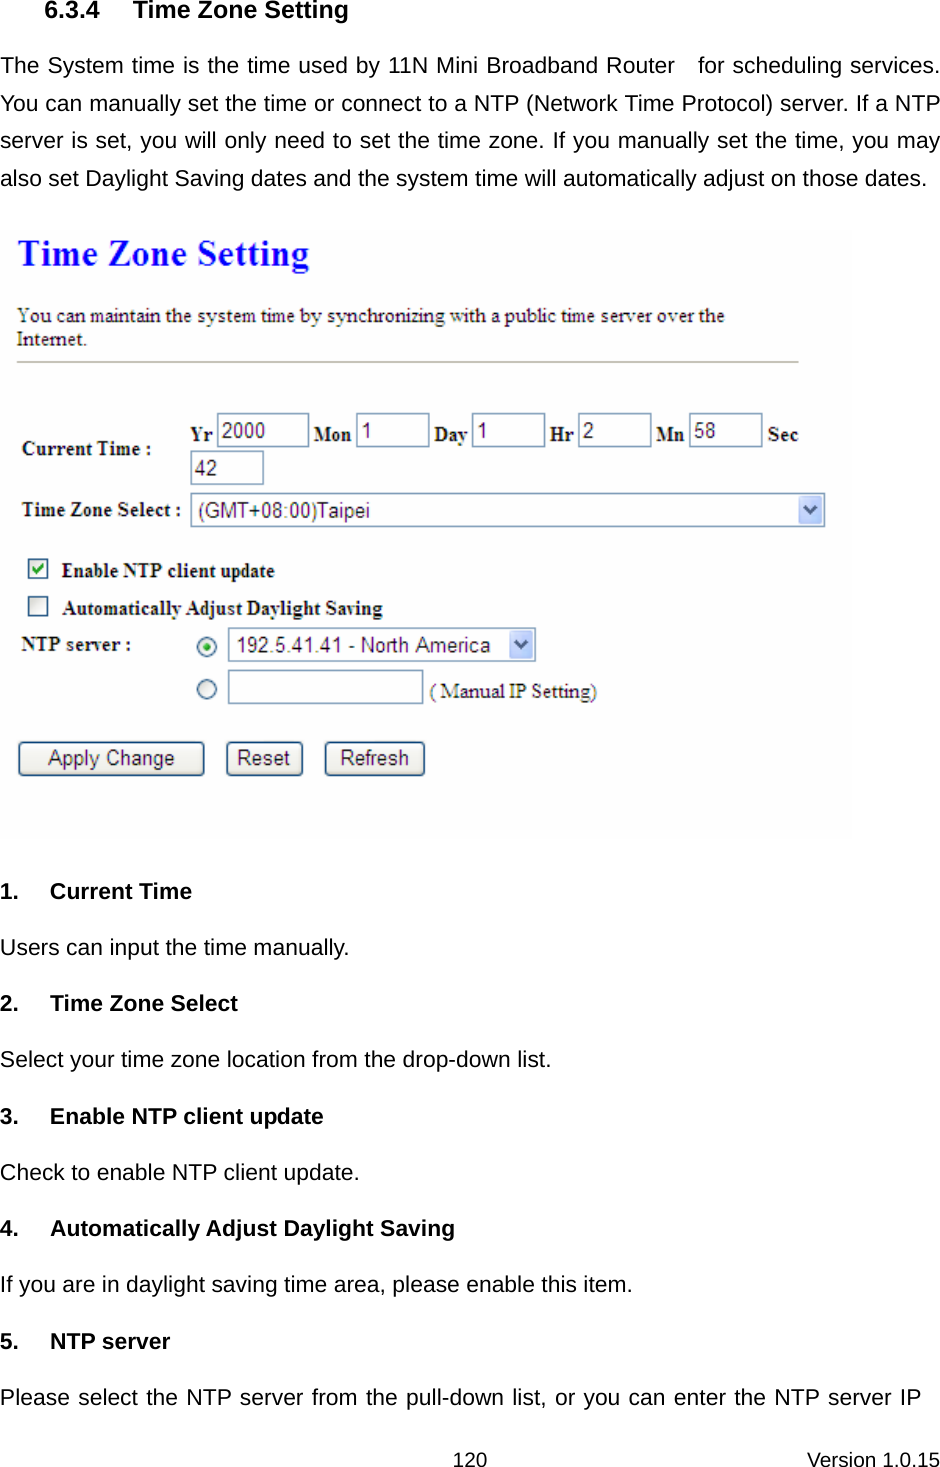 Version 1.0.15 1206.3.4  Time Zone Setting The System time is the time used by 11N Mini Broadband Router    for scheduling services. You can manually set the time or connect to a NTP (Network Time Protocol) server. If a NTP server is set, you will only need to set the time zone. If you manually set the time, you may also set Daylight Saving dates and the system time will automatically adjust on those dates.  1. Current Time Users can input the time manually. 2. Time Zone Select Select your time zone location from the drop-down list. 3.  Enable NTP client update Check to enable NTP client update. 4. Automatically Adjust Daylight Saving If you are in daylight saving time area, please enable this item.   5. NTP server Please select the NTP server from the pull-down list, or you can enter the NTP server IP 